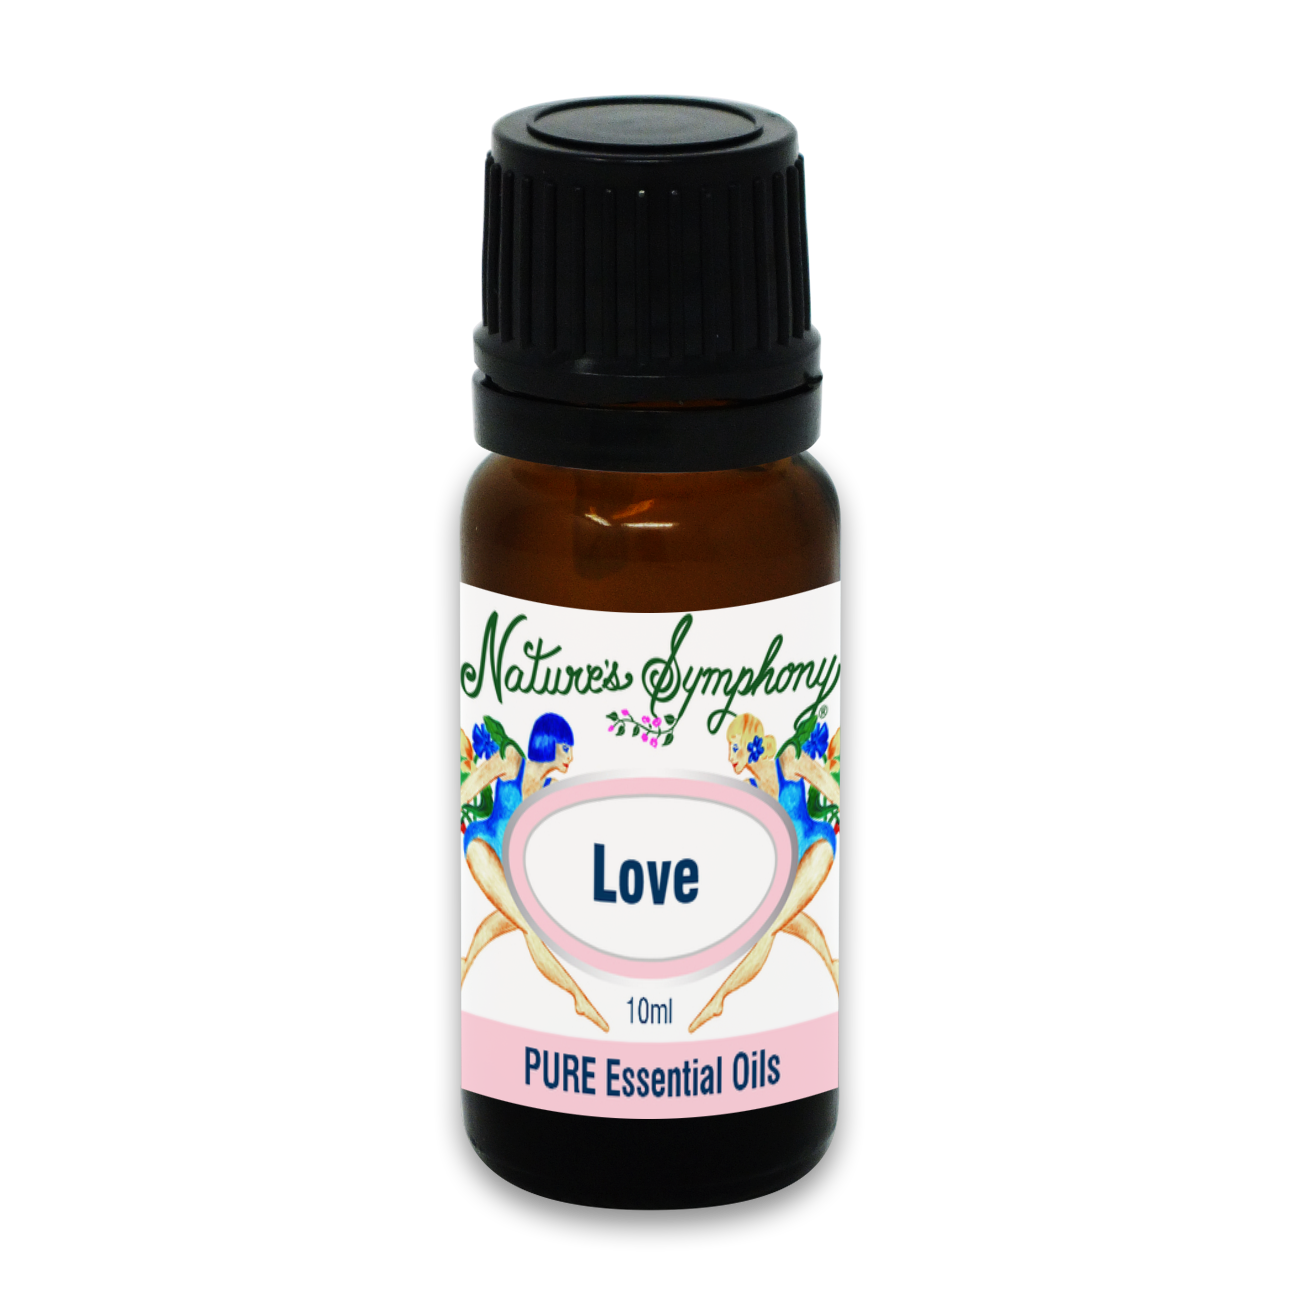 Love, Ambiance Diffusion blend - 10ml